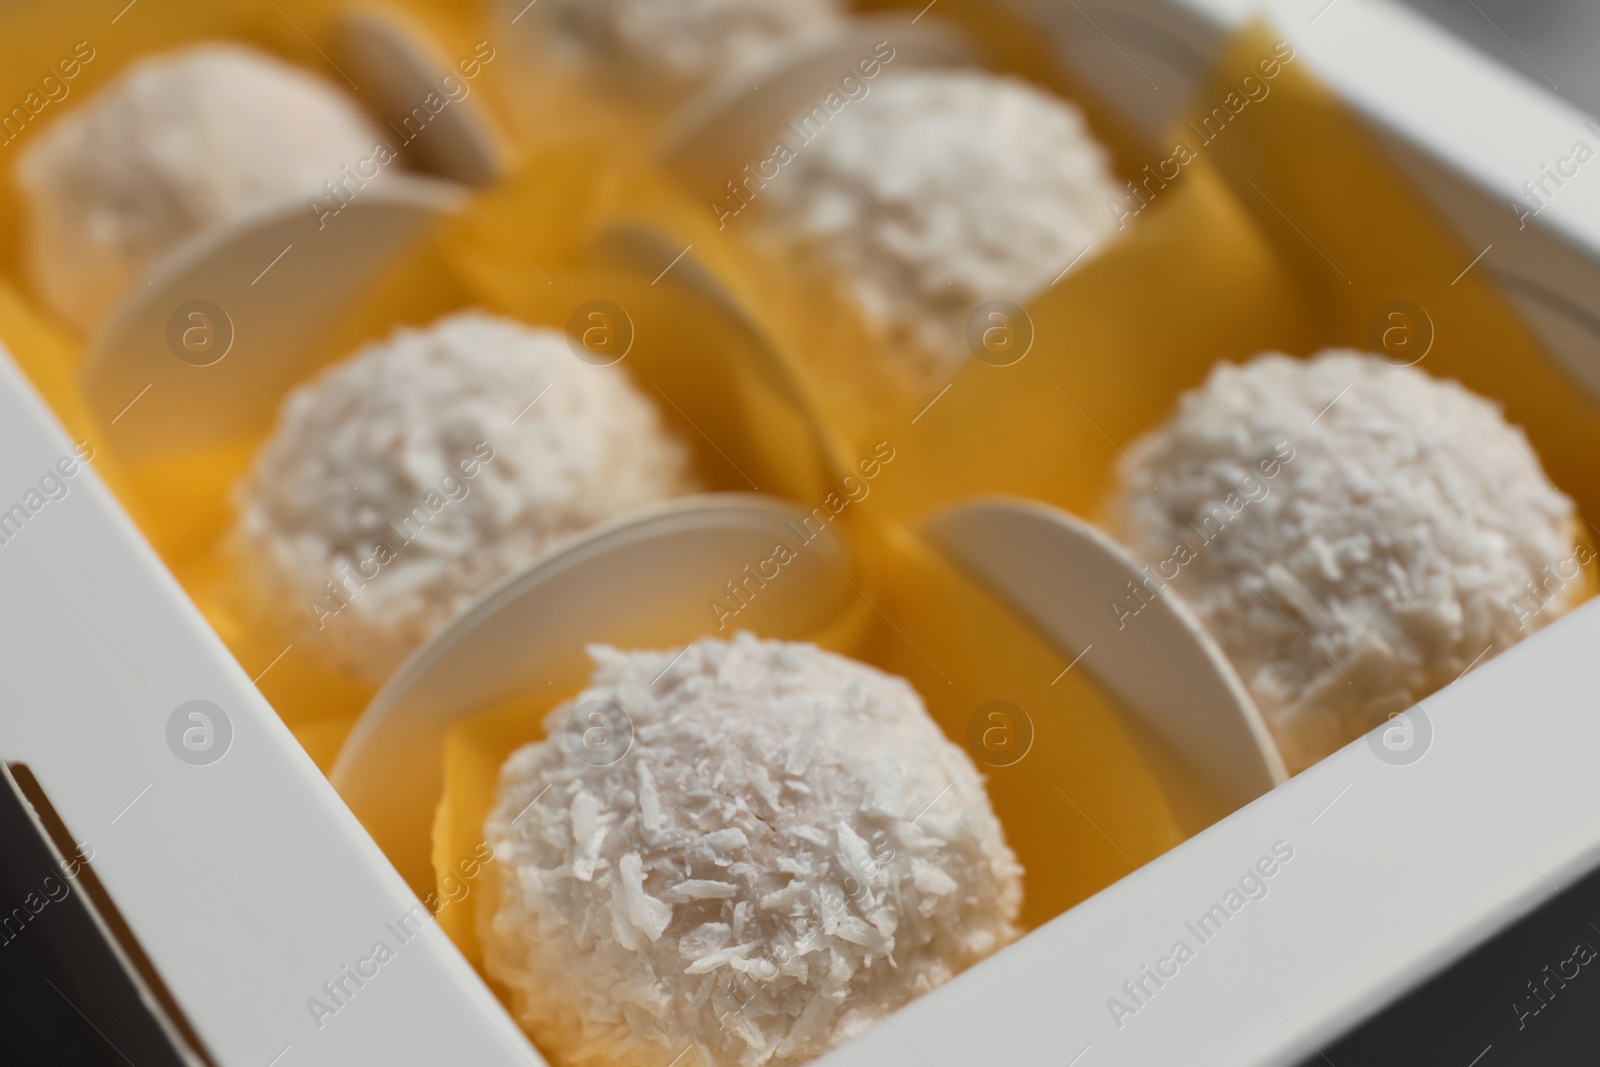 Photo of Delicious candies in white box, closeup view